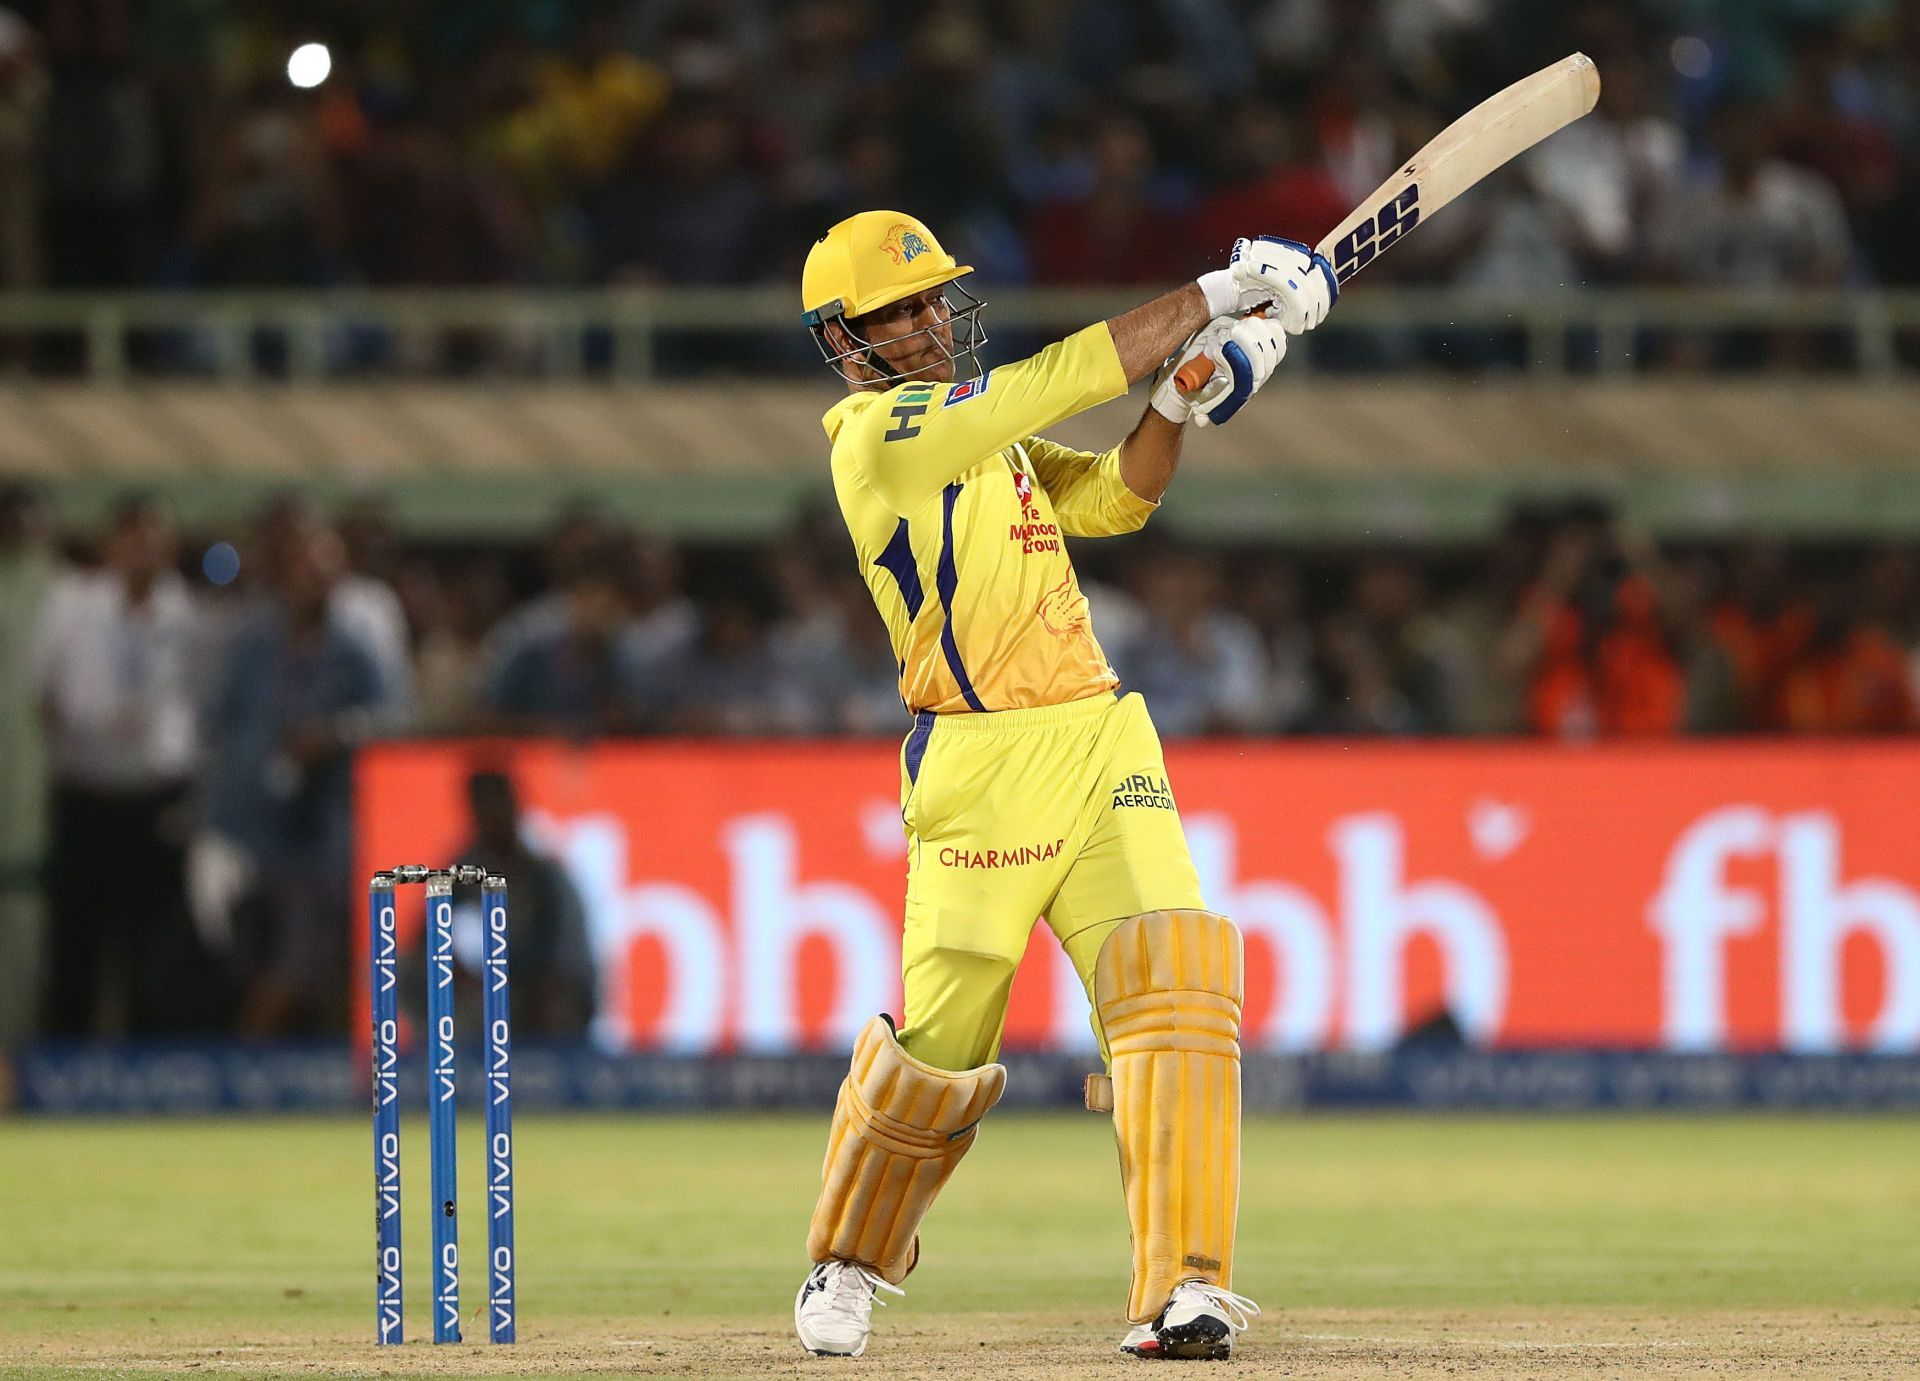 MS Dhoni is the face of the Chennai Super Kings team since day 1